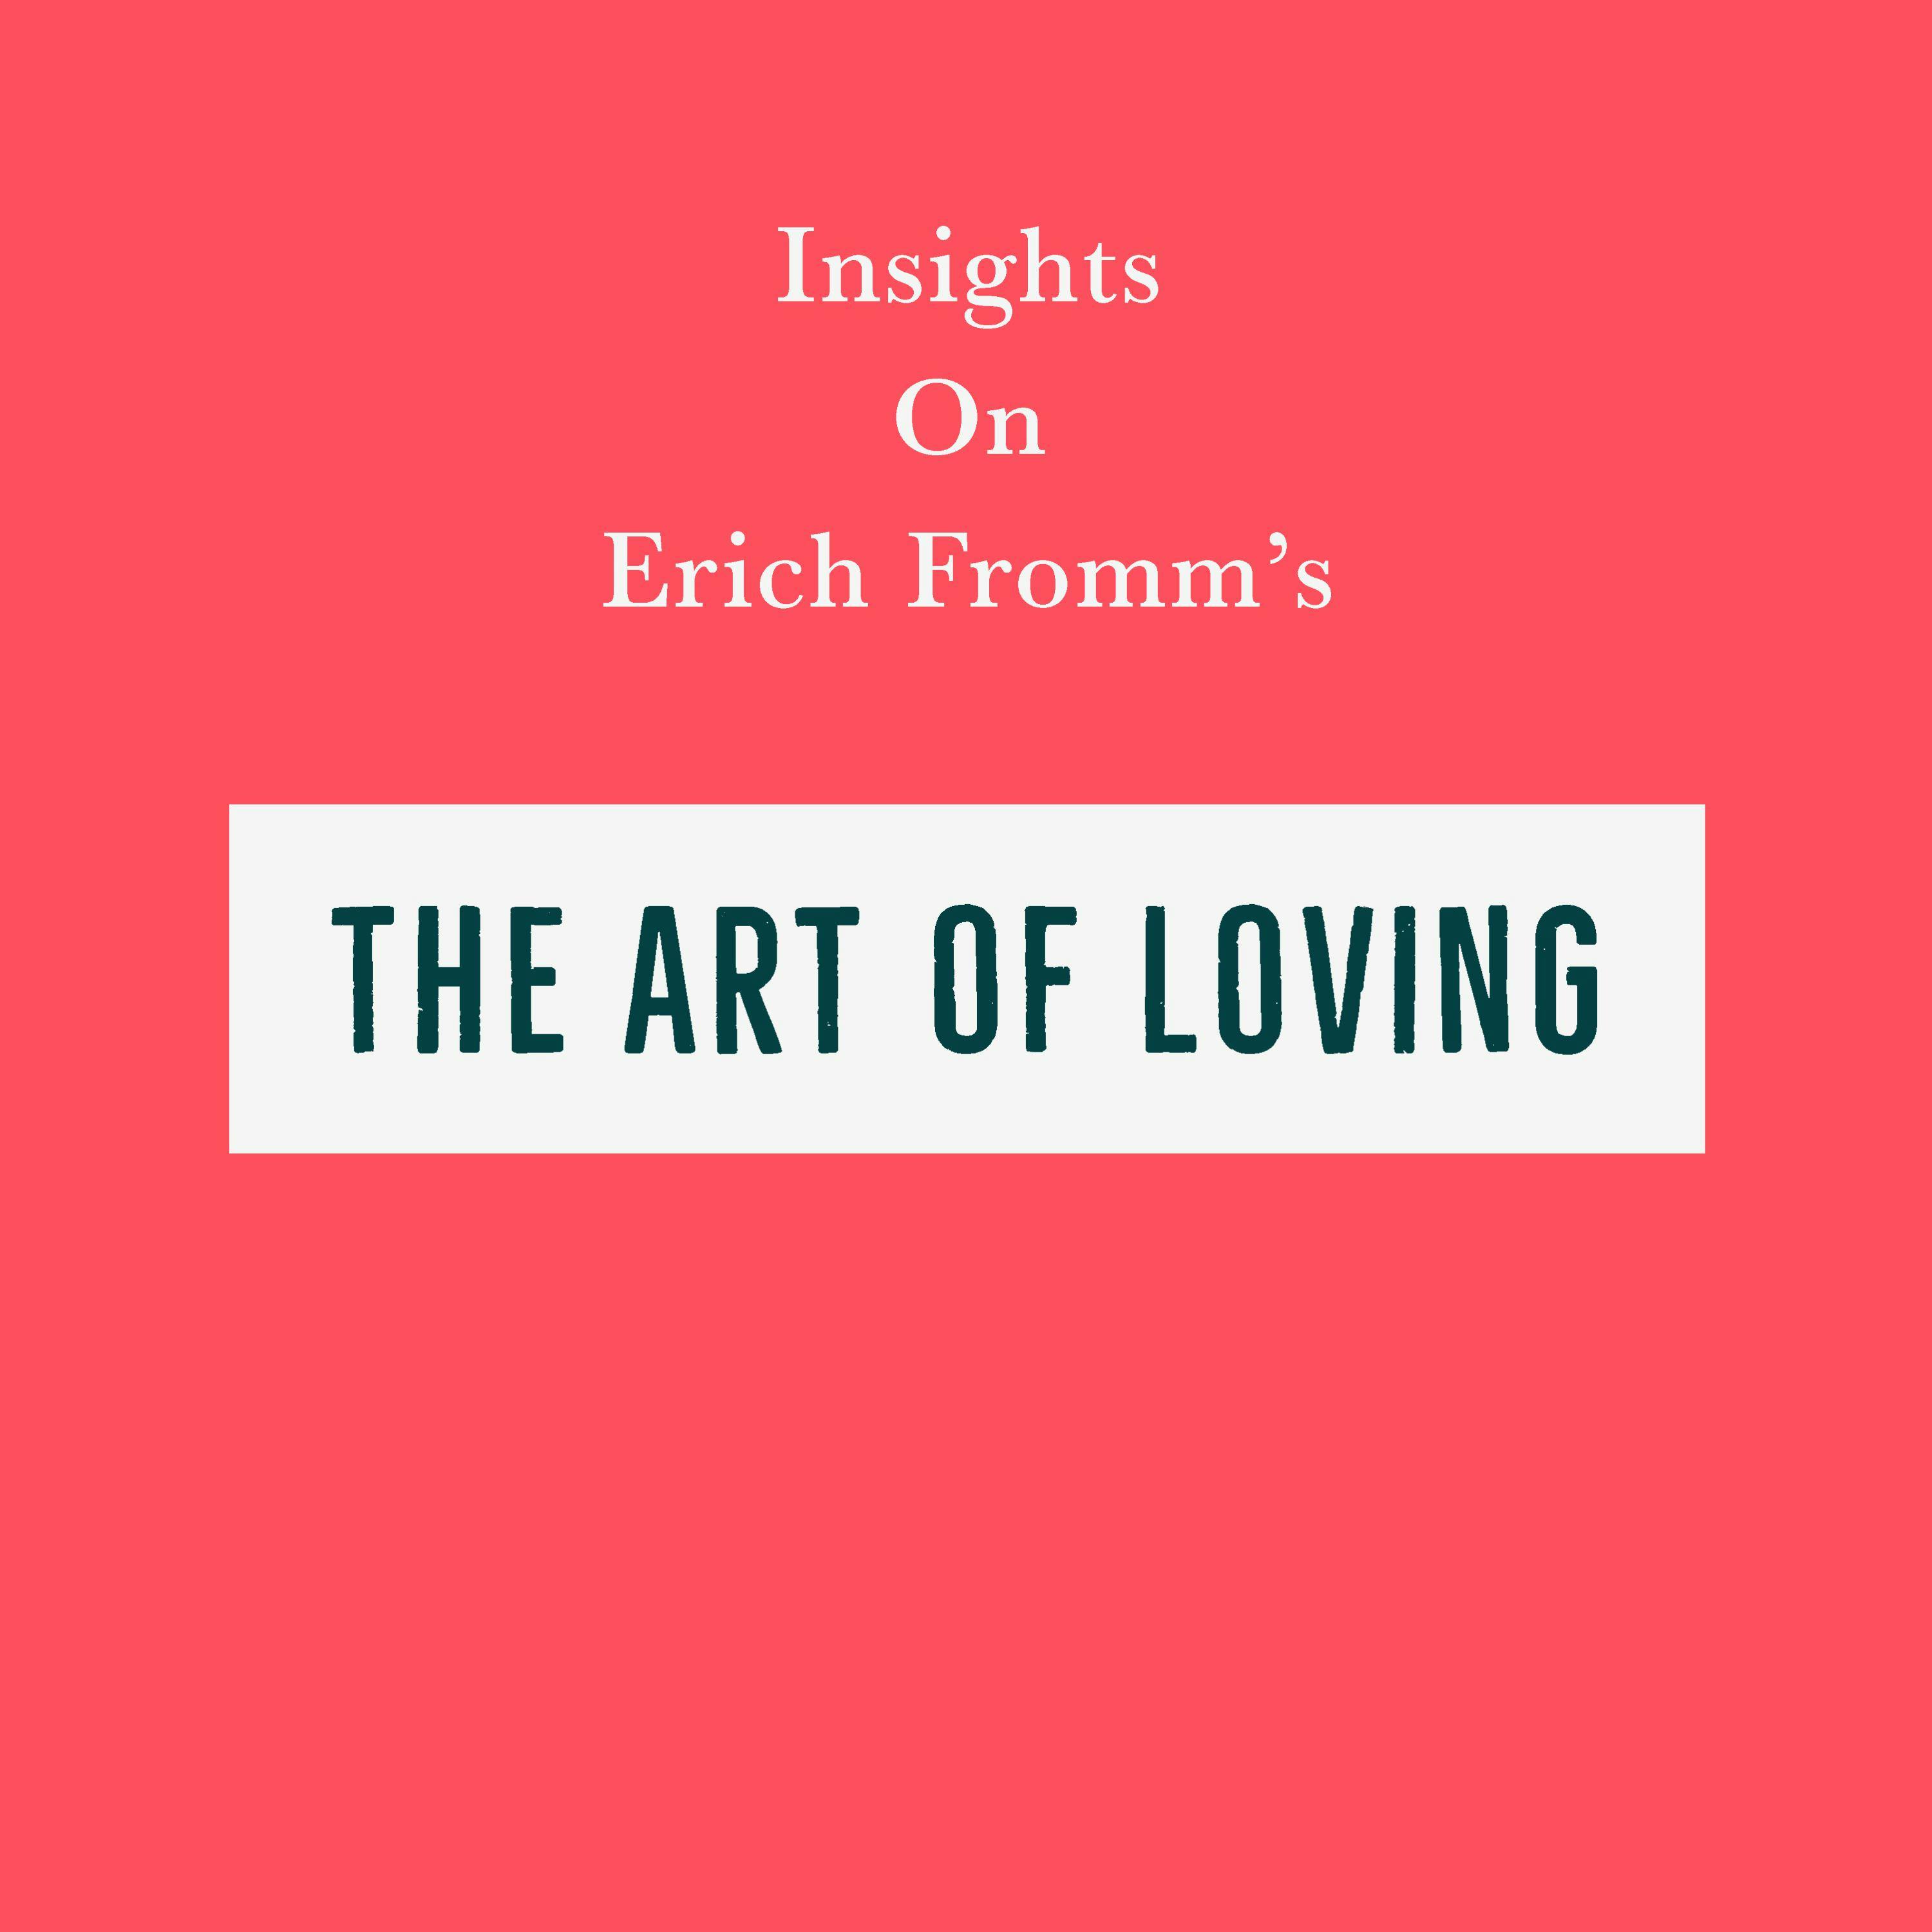 Insights on Erich Fromm’s The Art of Loving - undefined